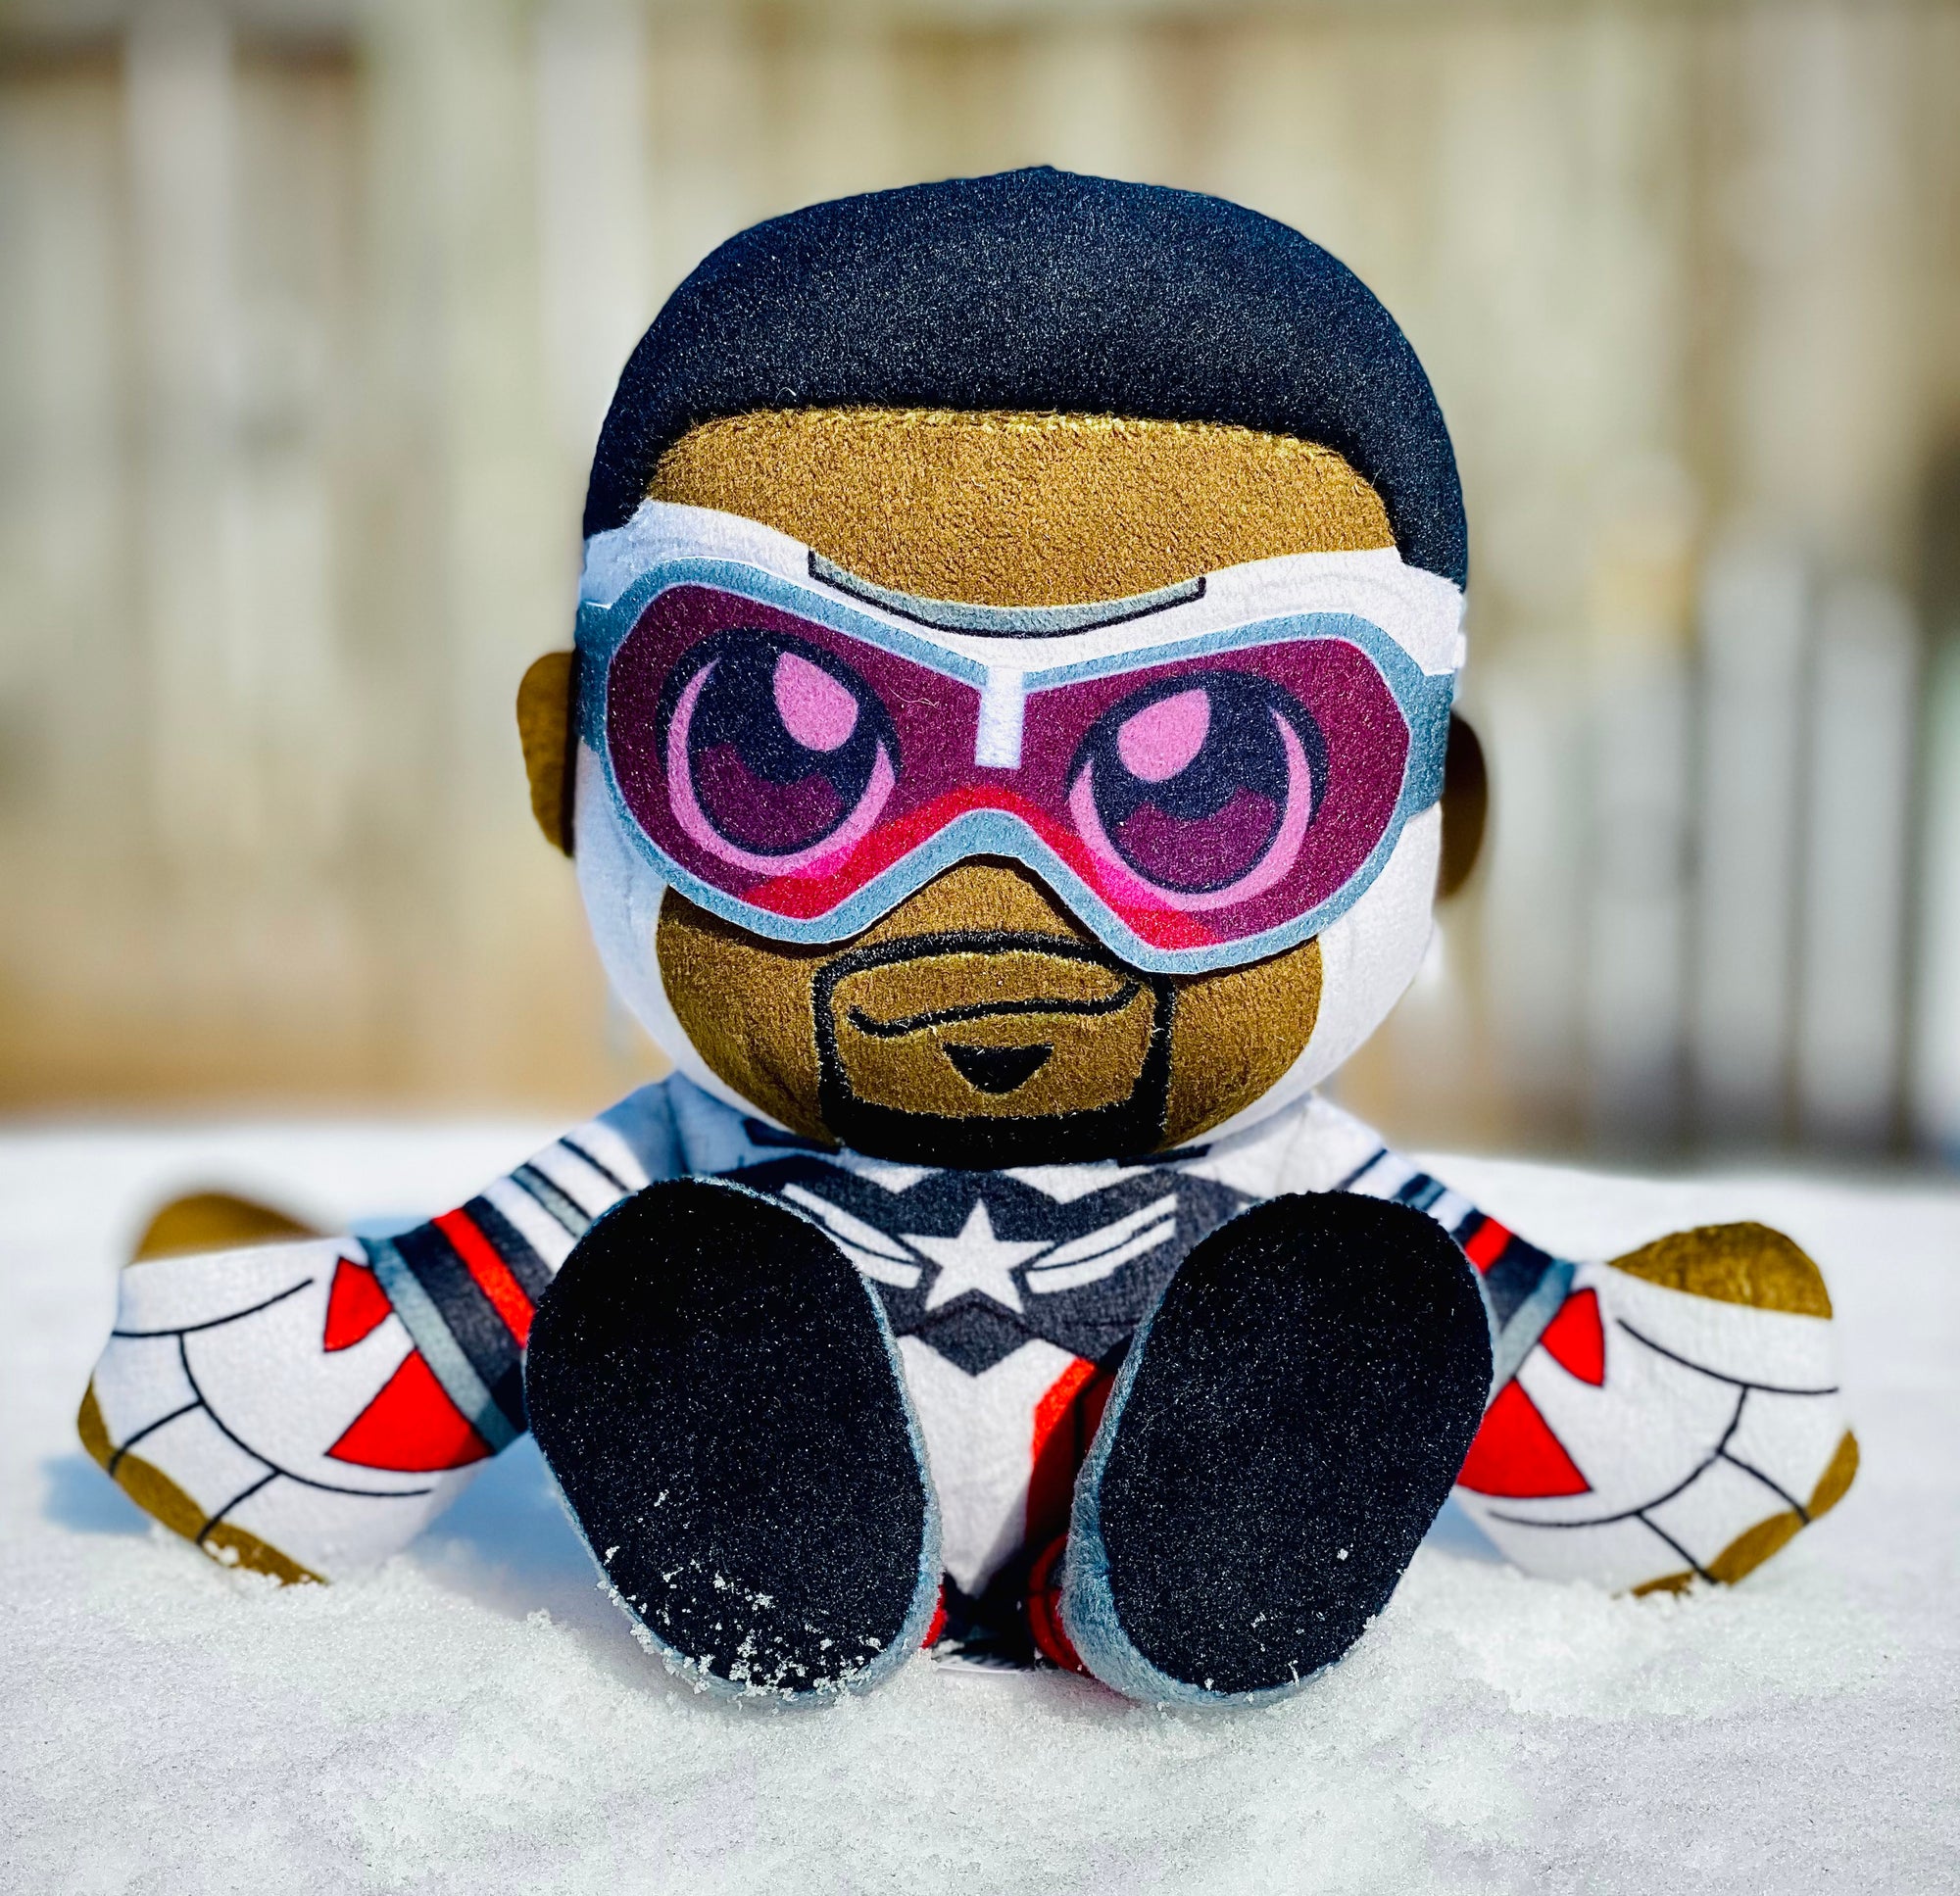 Newest Captain America (Sam Wilson) Now Available as Plushies from Bleacher Creatures